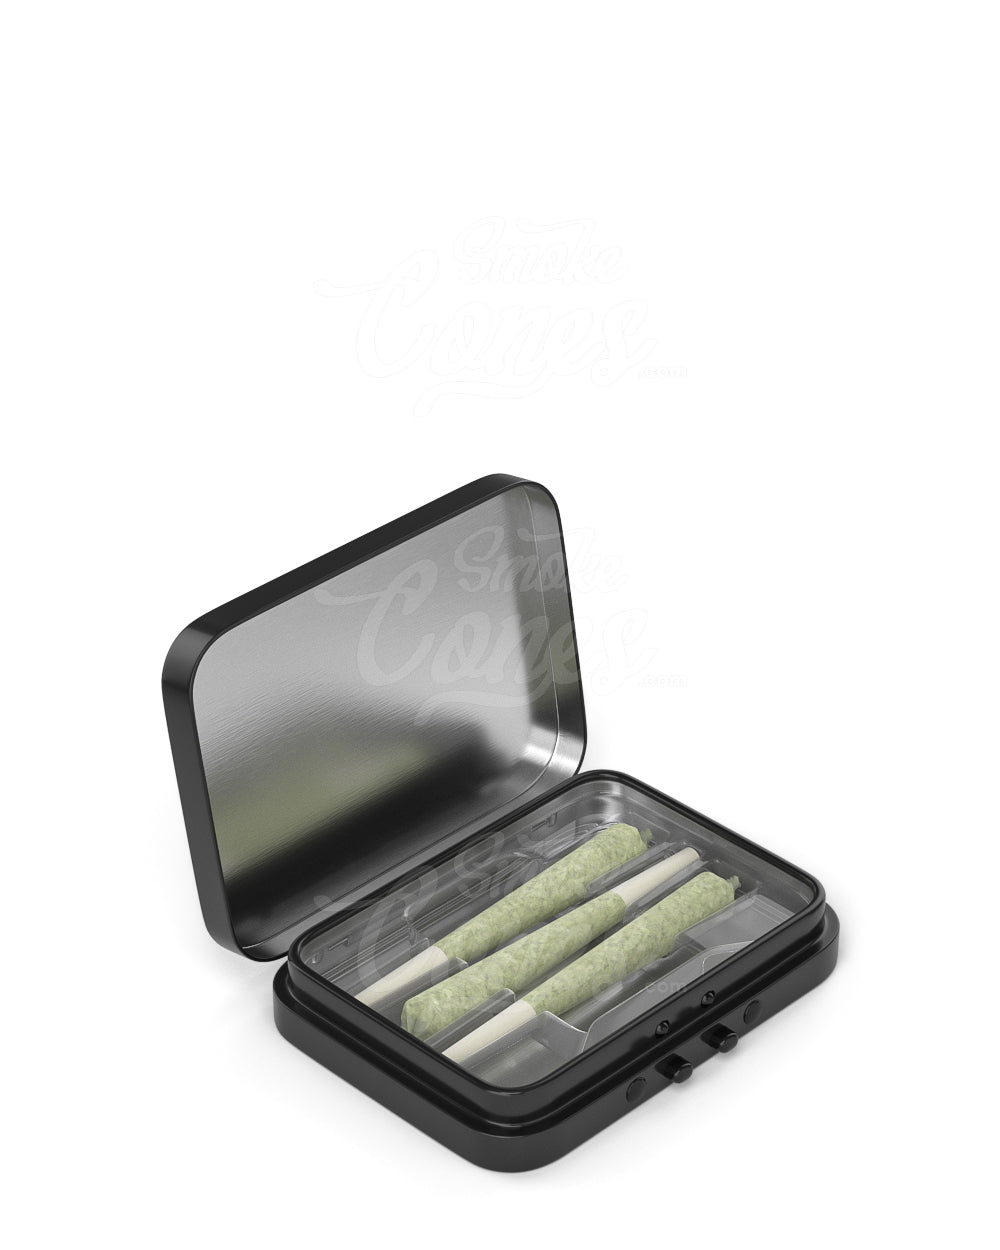 Clear Edible & Joint Box Plastic Insert Tray for 3 Mini 70mm Pre Rolled Cones 100/Box - 8